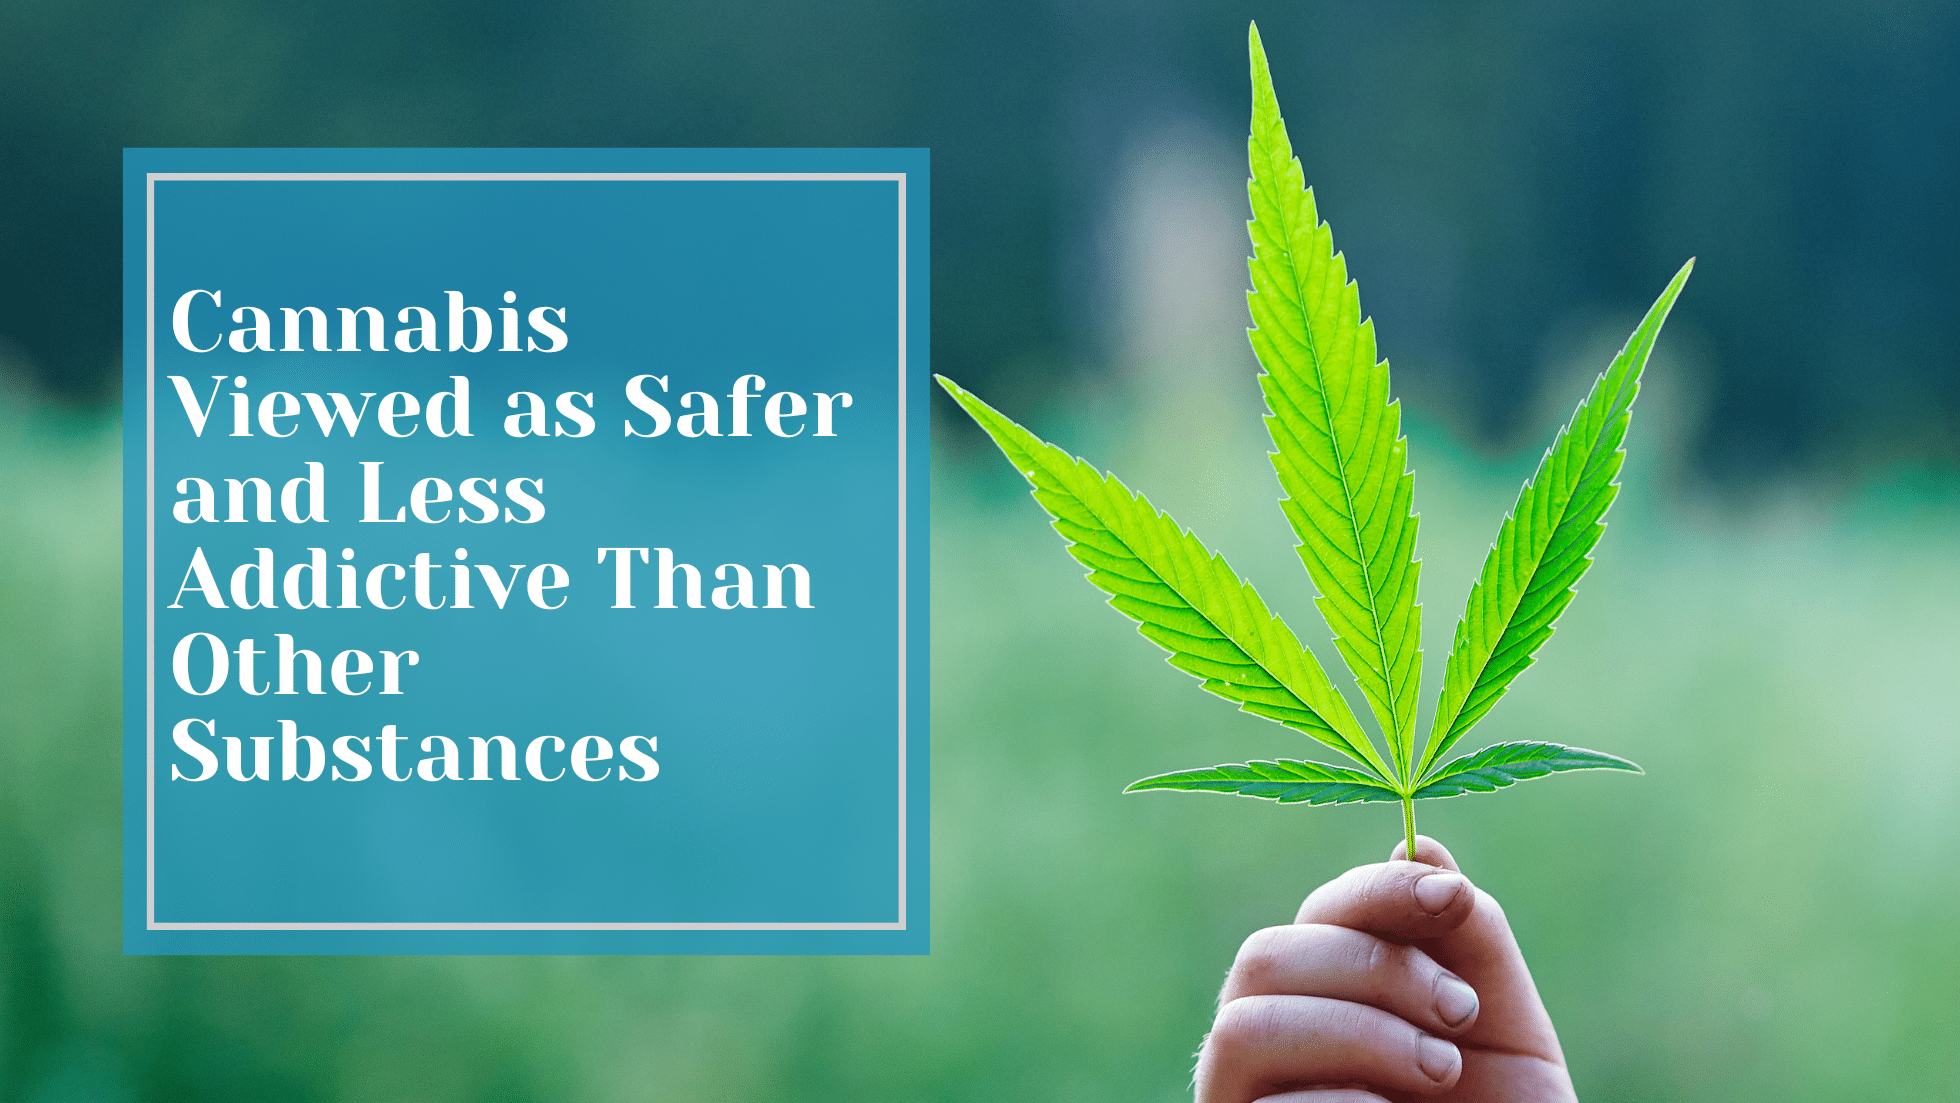 study finds cannabis safer than other substances